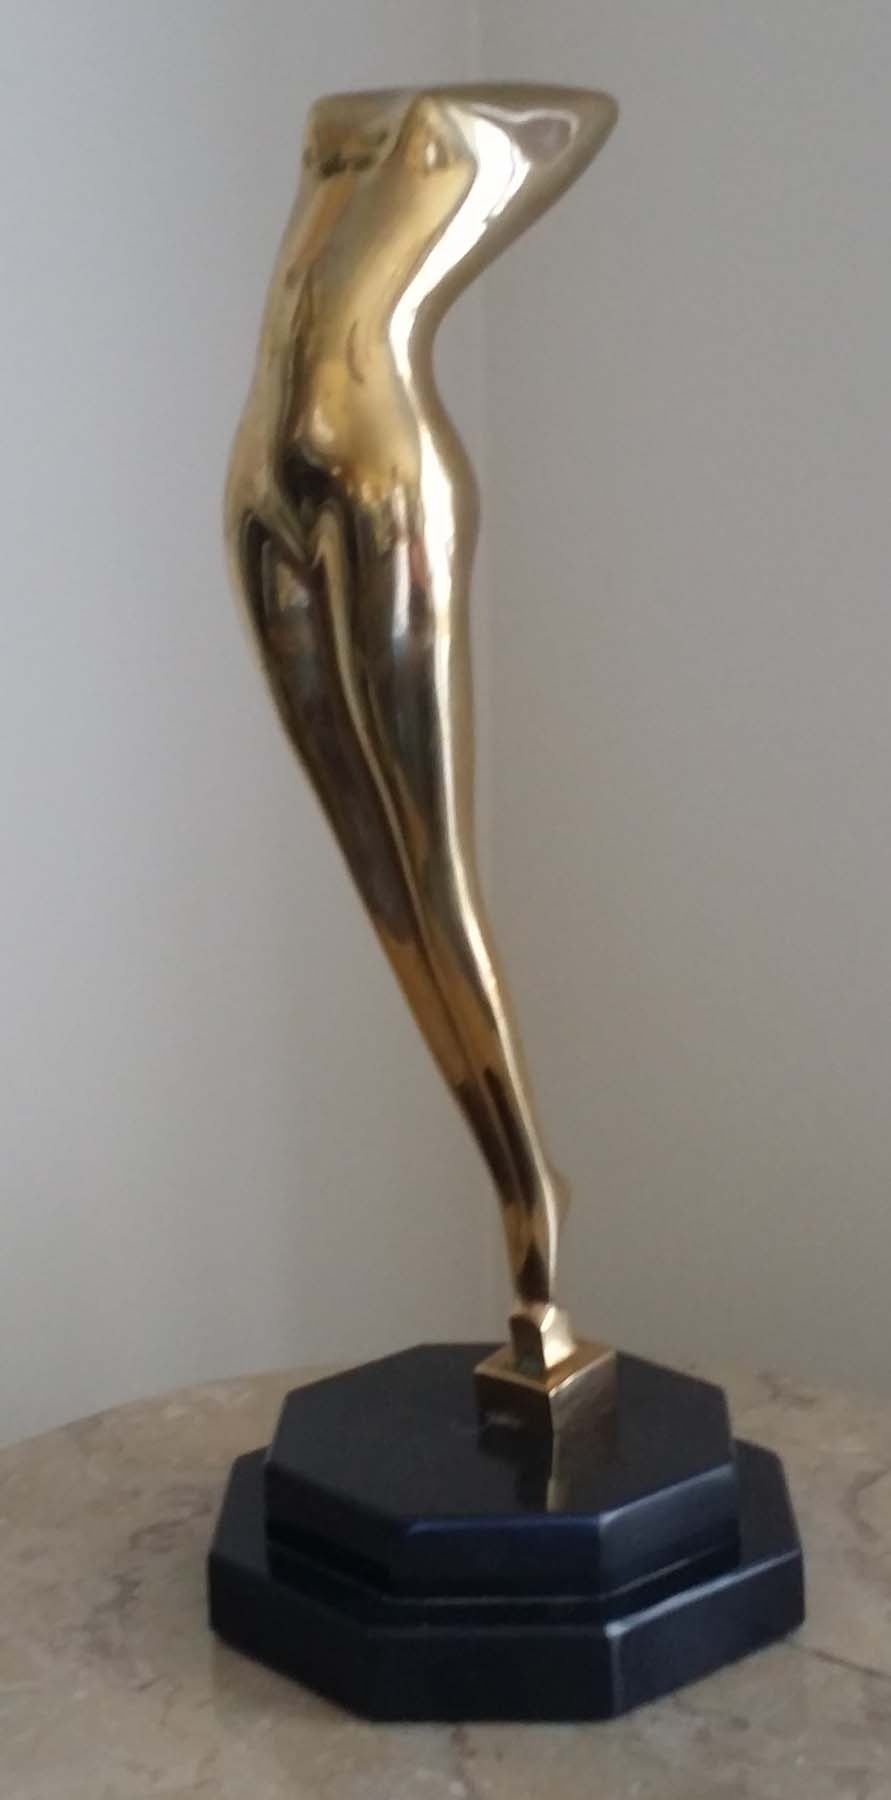 James B. Gibson

Polished bronze female figure, signed and dated 1983

On marble base, 12 inches tall.